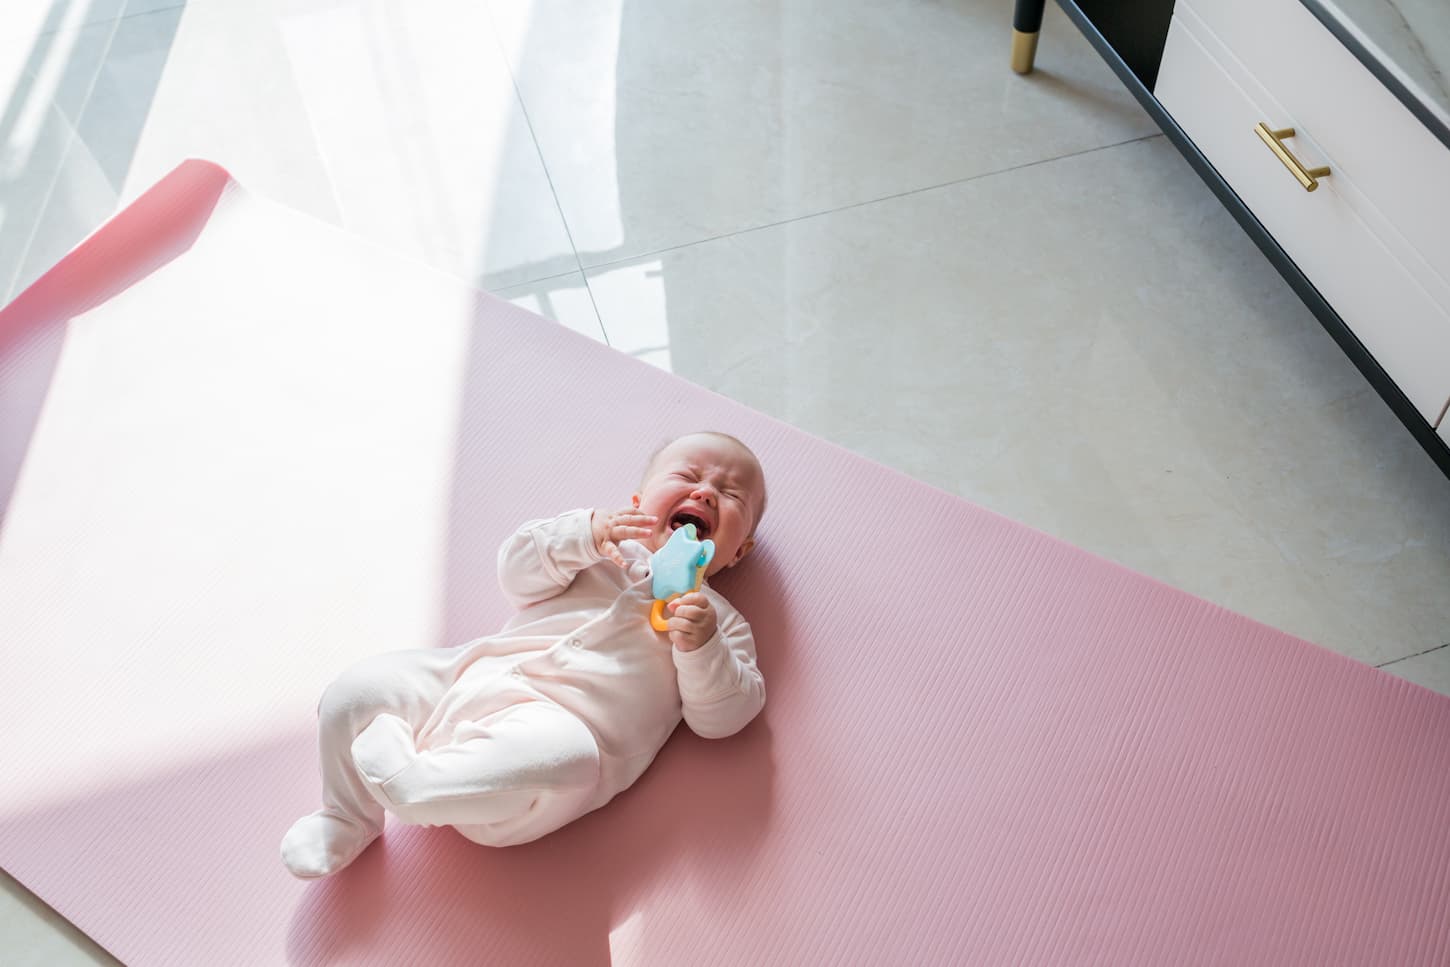 An image of a 5-6-month-old baby crying at home on a pink mat wearing a white babygrow.